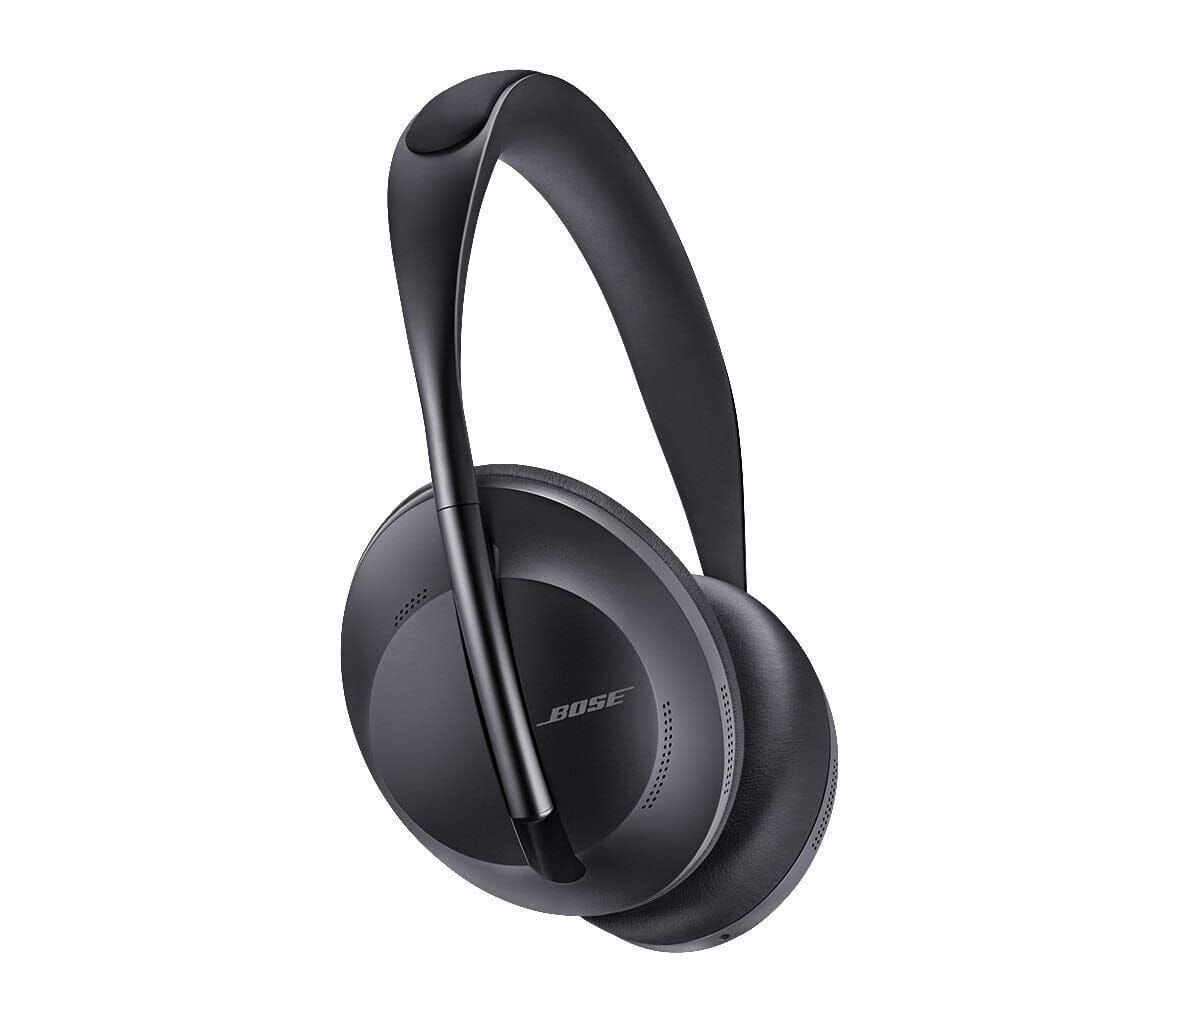 Rent Bose 700 Over-ear Bluetooth Headphones from €13.90 per month